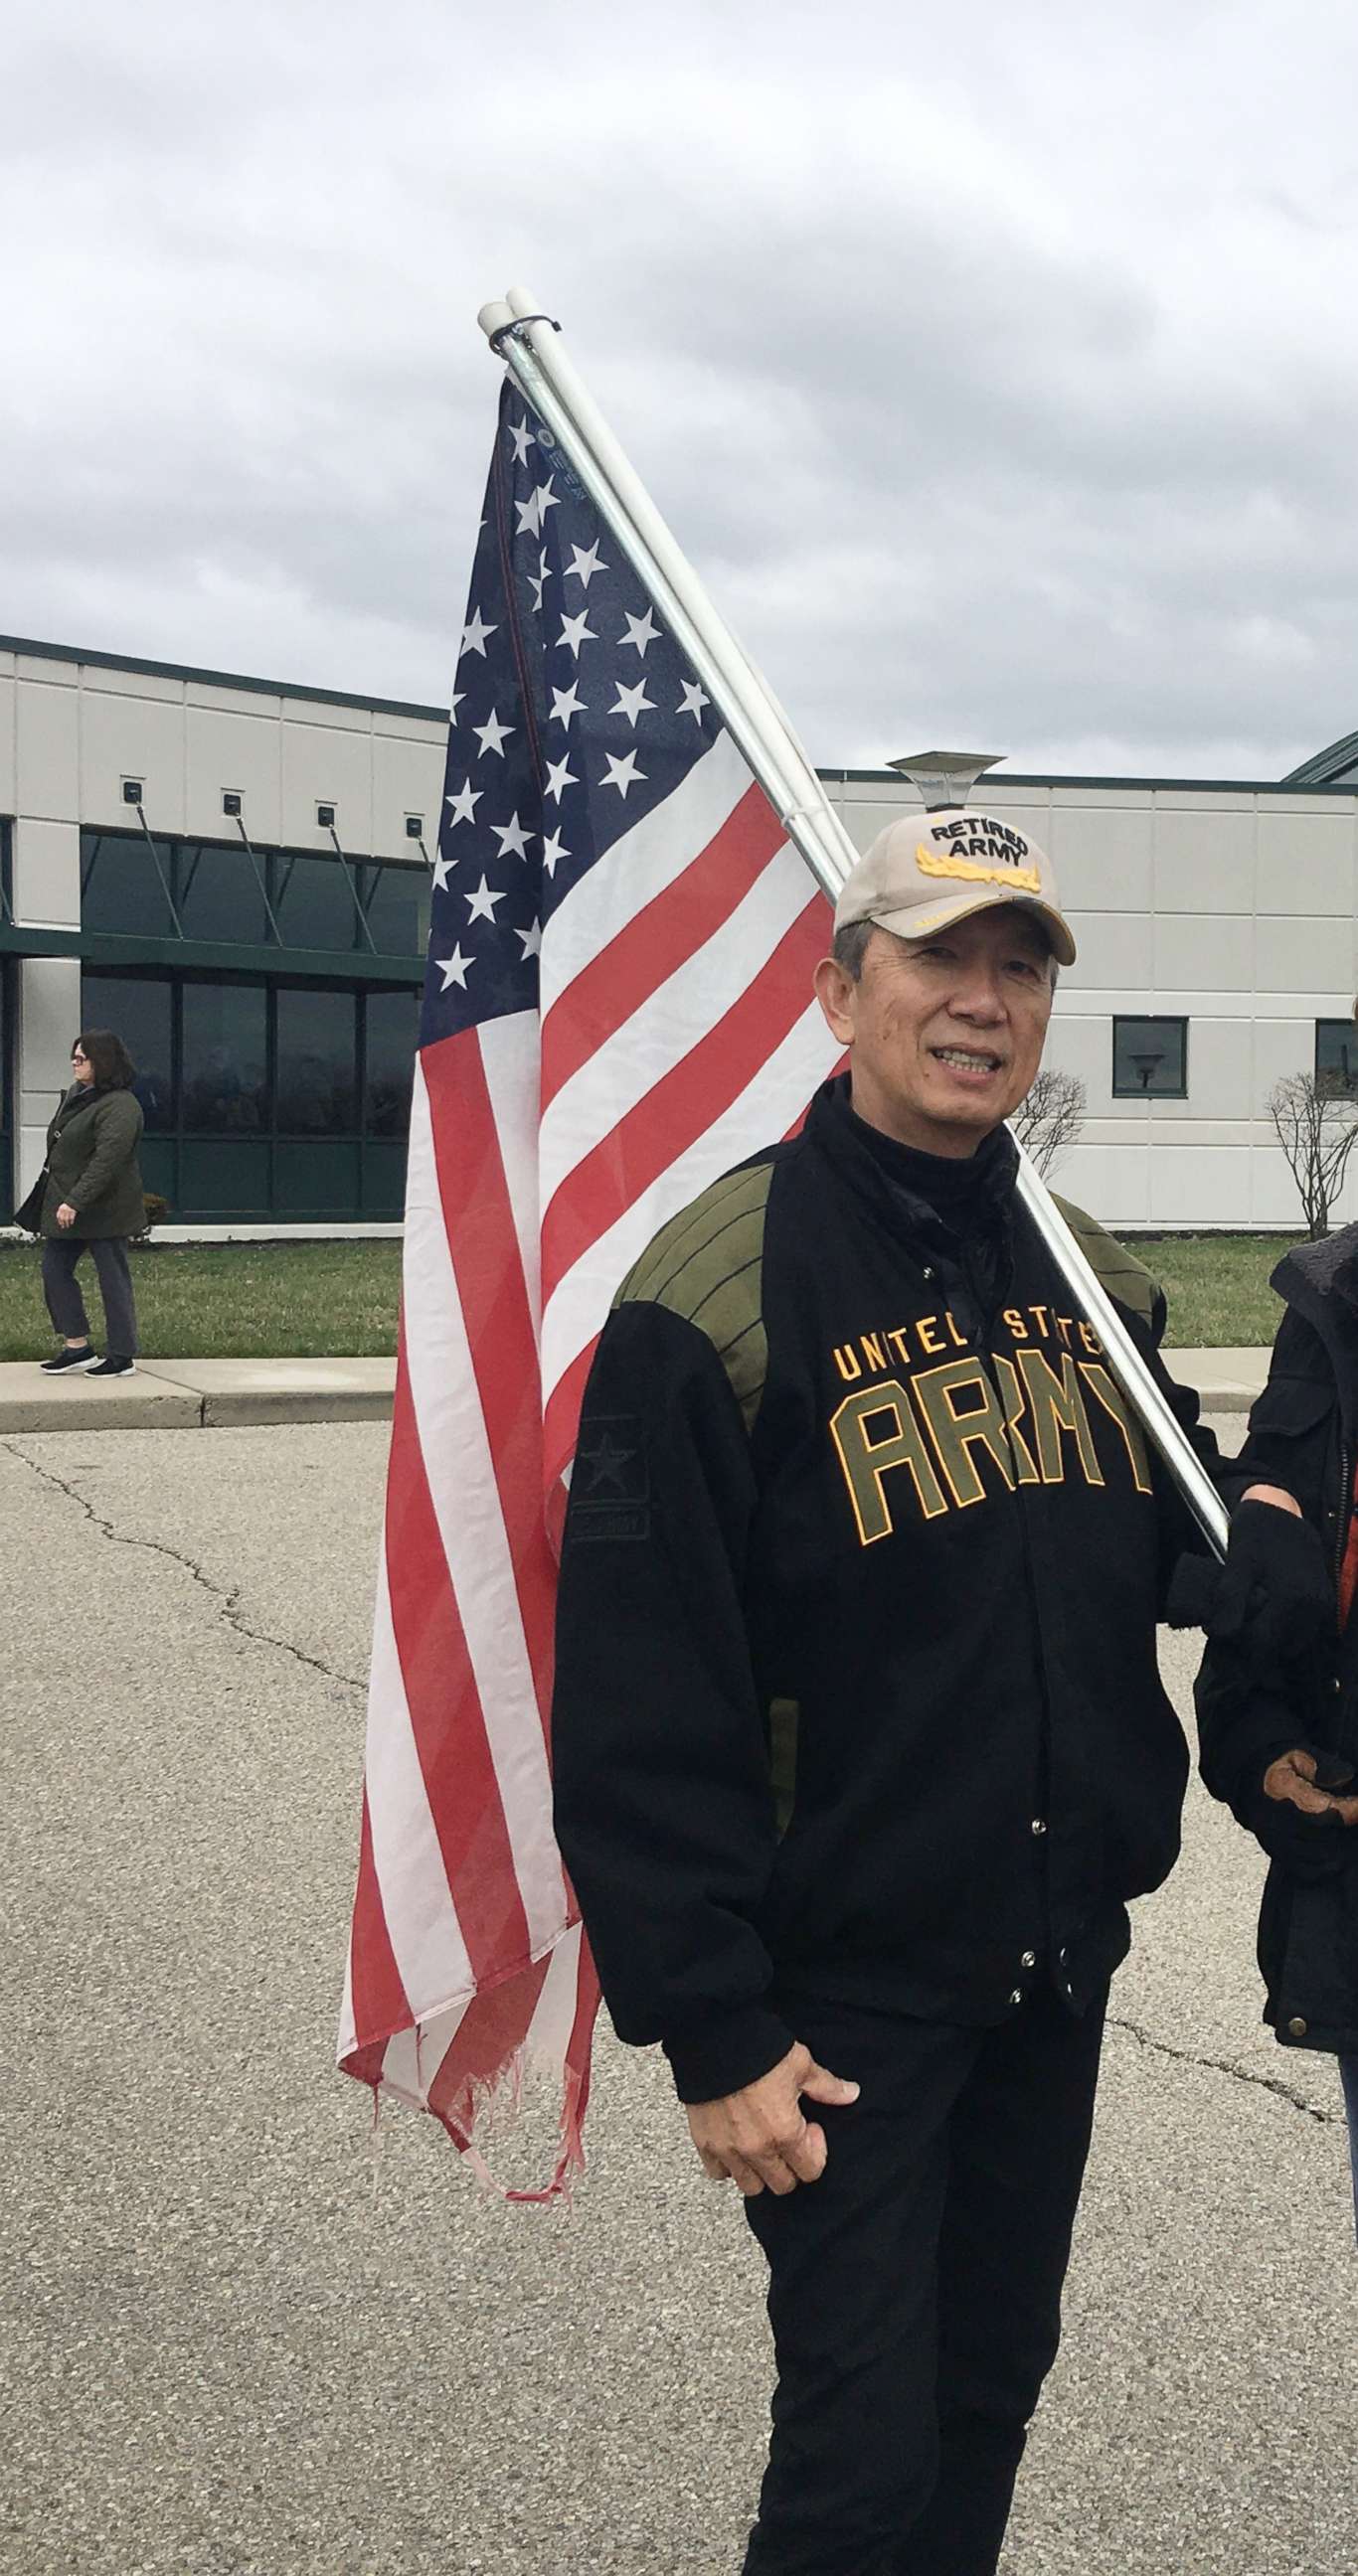 PHOTO: Lee Wong, a Westchester, Ohio board member, shared this photo of himself wearing his U.S. Army jacket and hat.